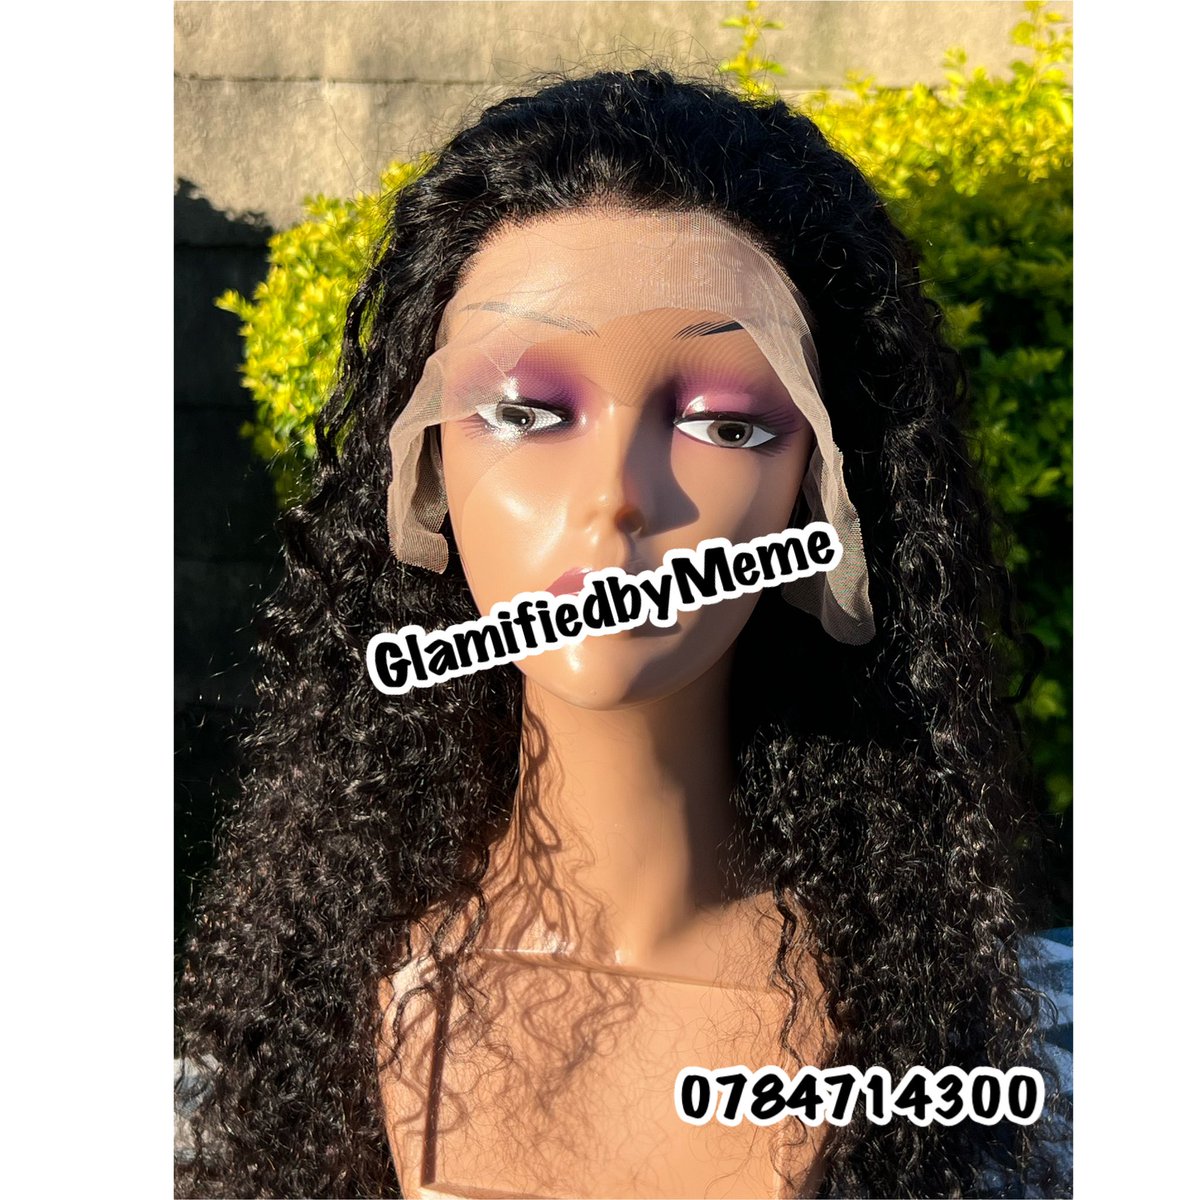 Buying a wig for your woman is a love language. Allow me to preach the waterwave gospel!

Straight & Curly wigs (13*4)

Contact :0784714300

10” $100
12” $110
14” $125
16” $135
18” $140
20” $160
22” $170
24” $200
30” $300

4*4 wigs
12” $100
14” $115
16” $125